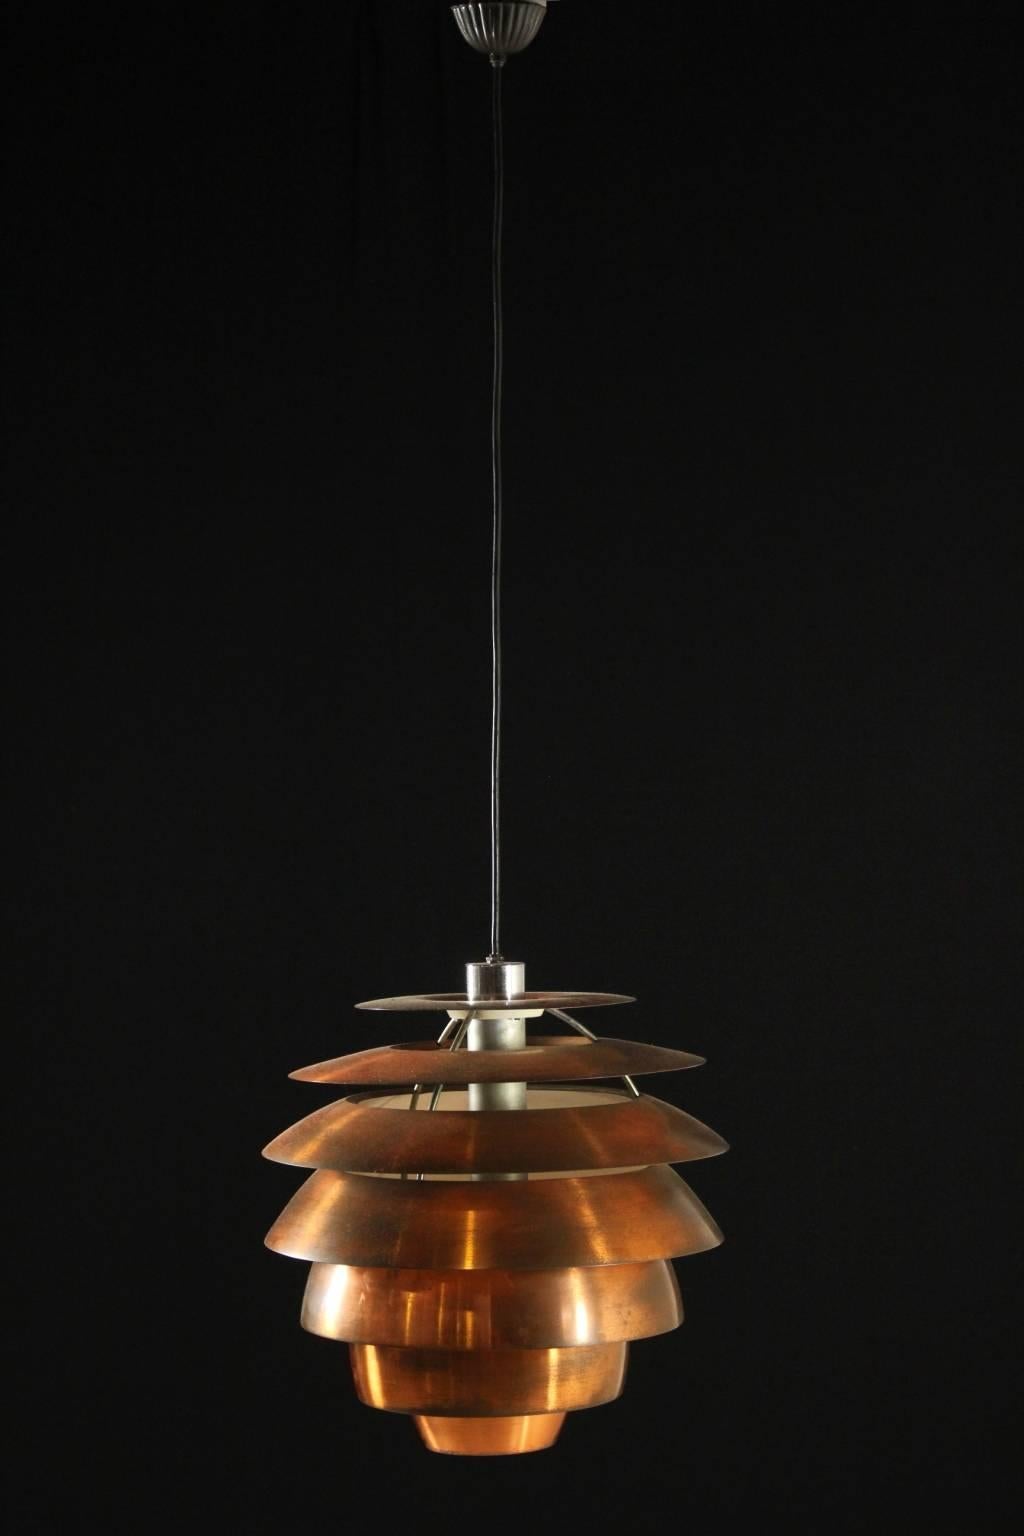 A hanging lamp by Stilnovo, brushed copper, lacquered metal. 1231 model. Manufactured in Italy, 1960s.